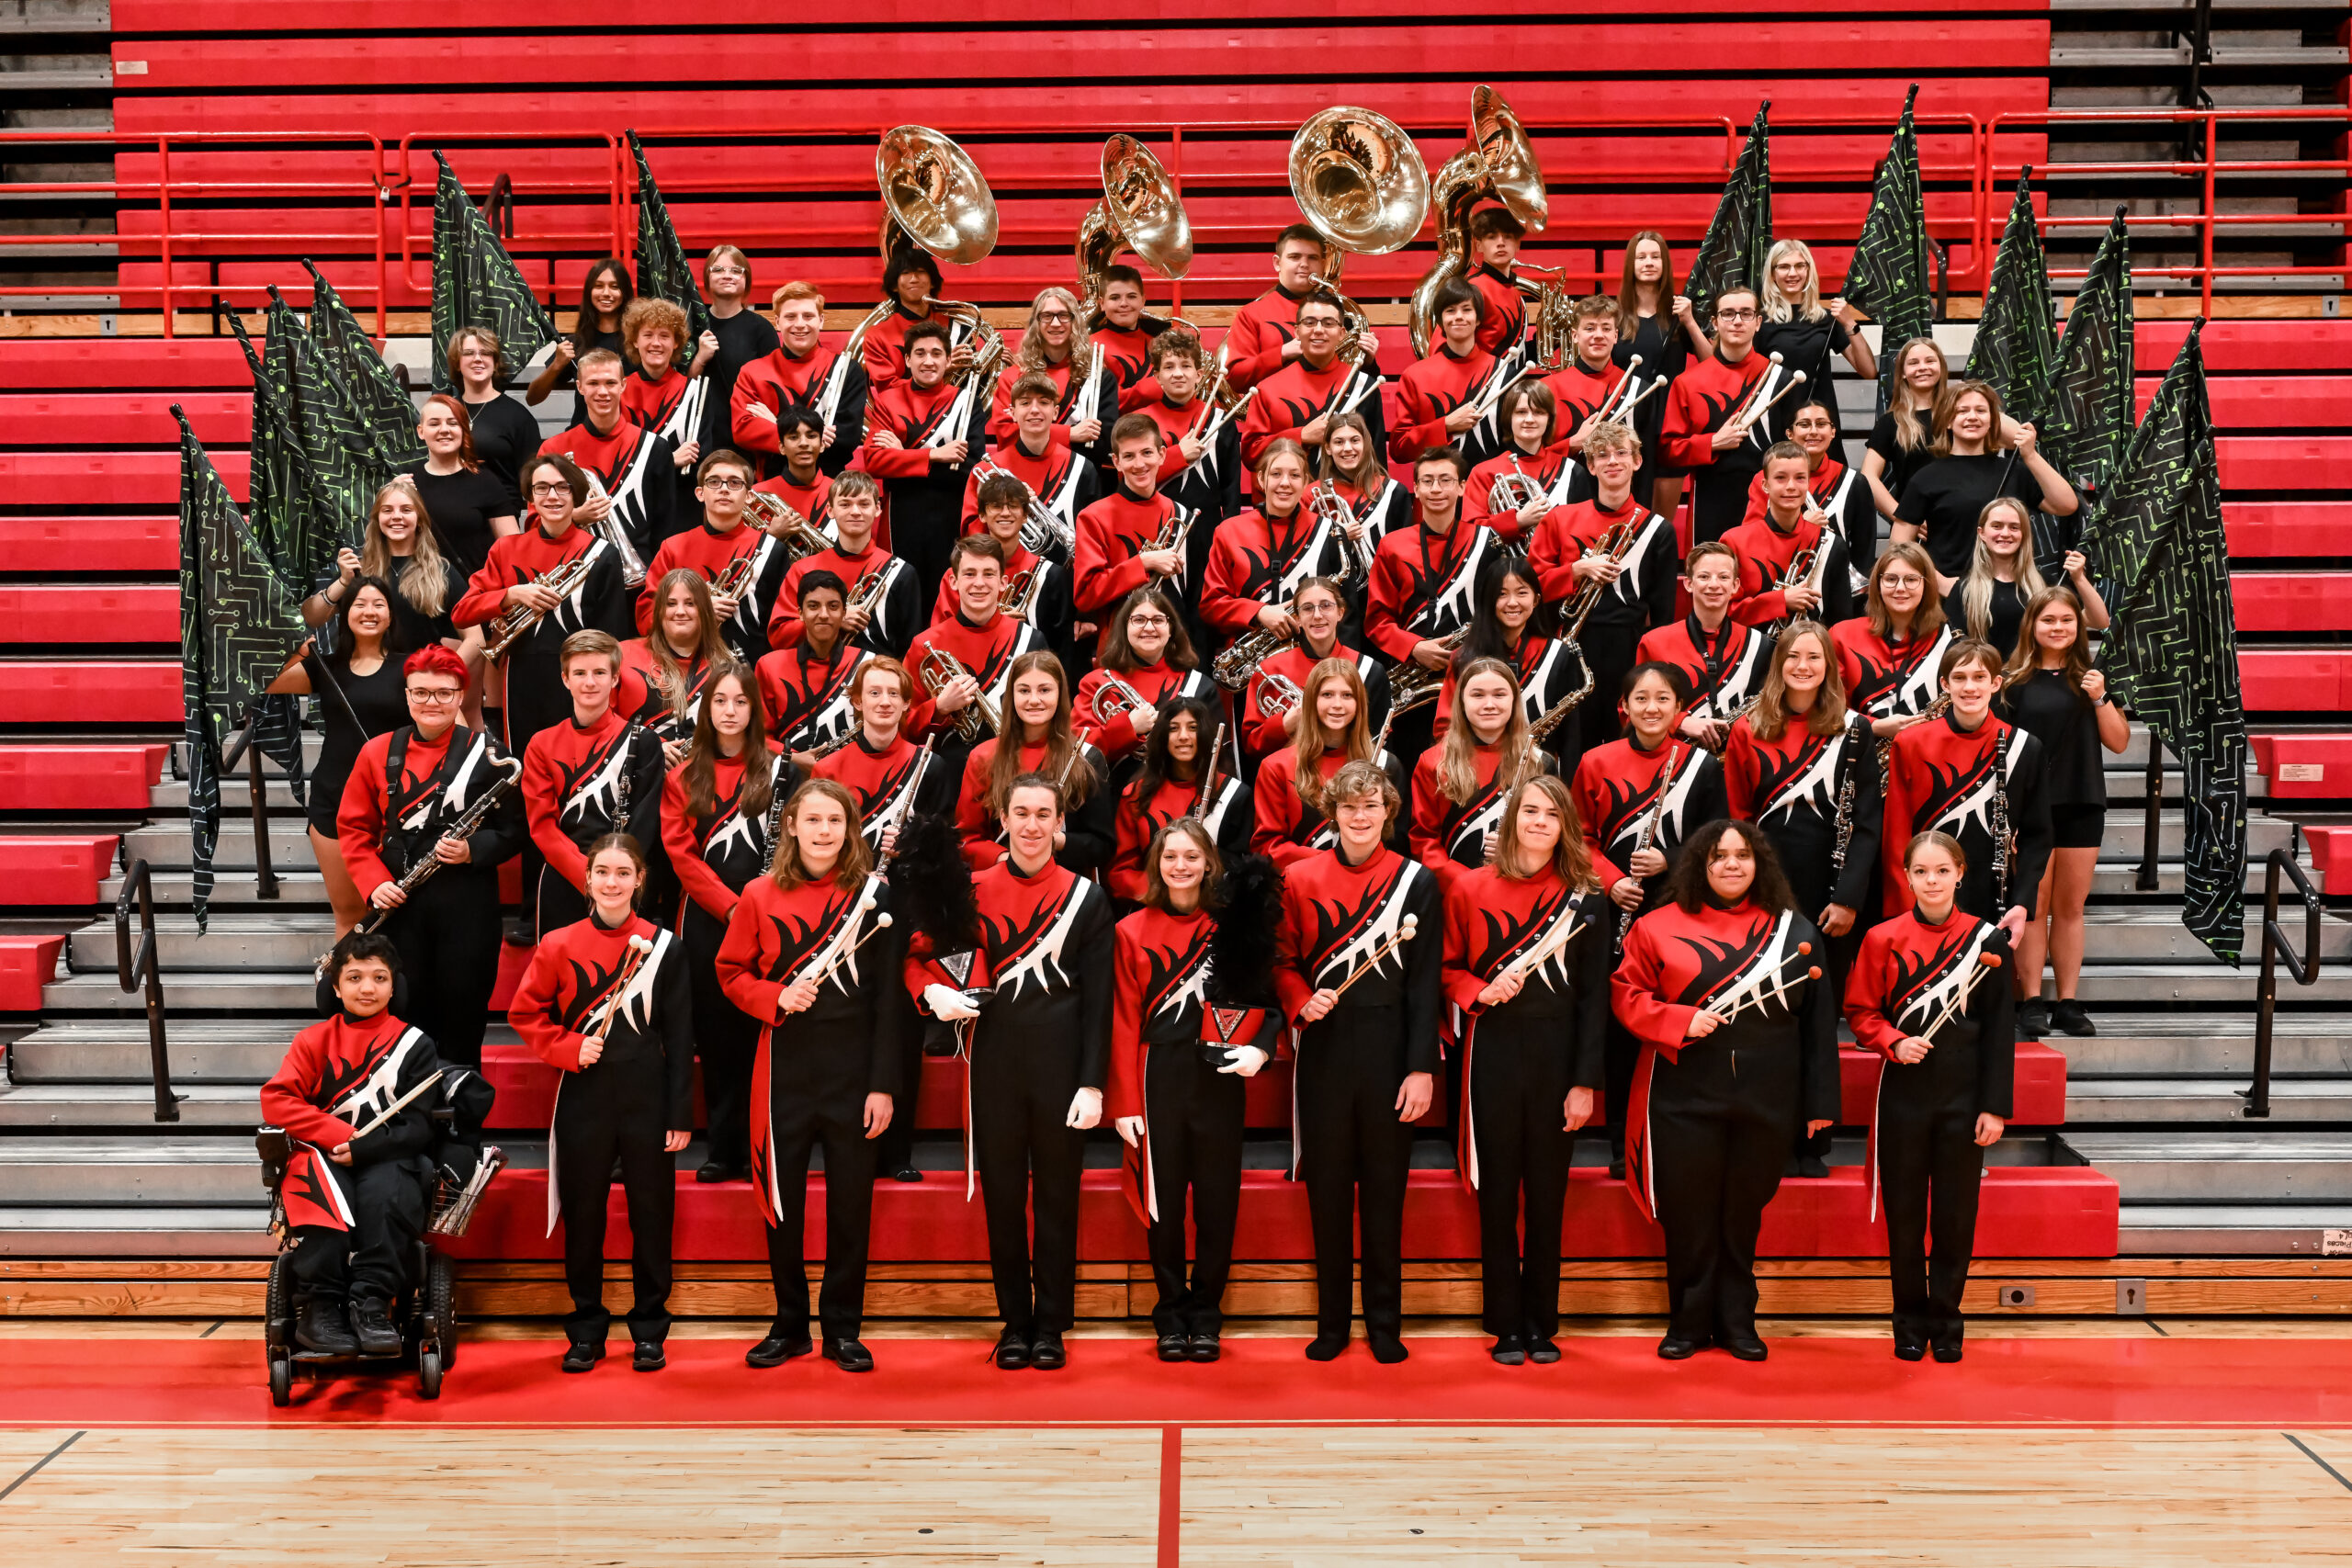 Photo of marching band members